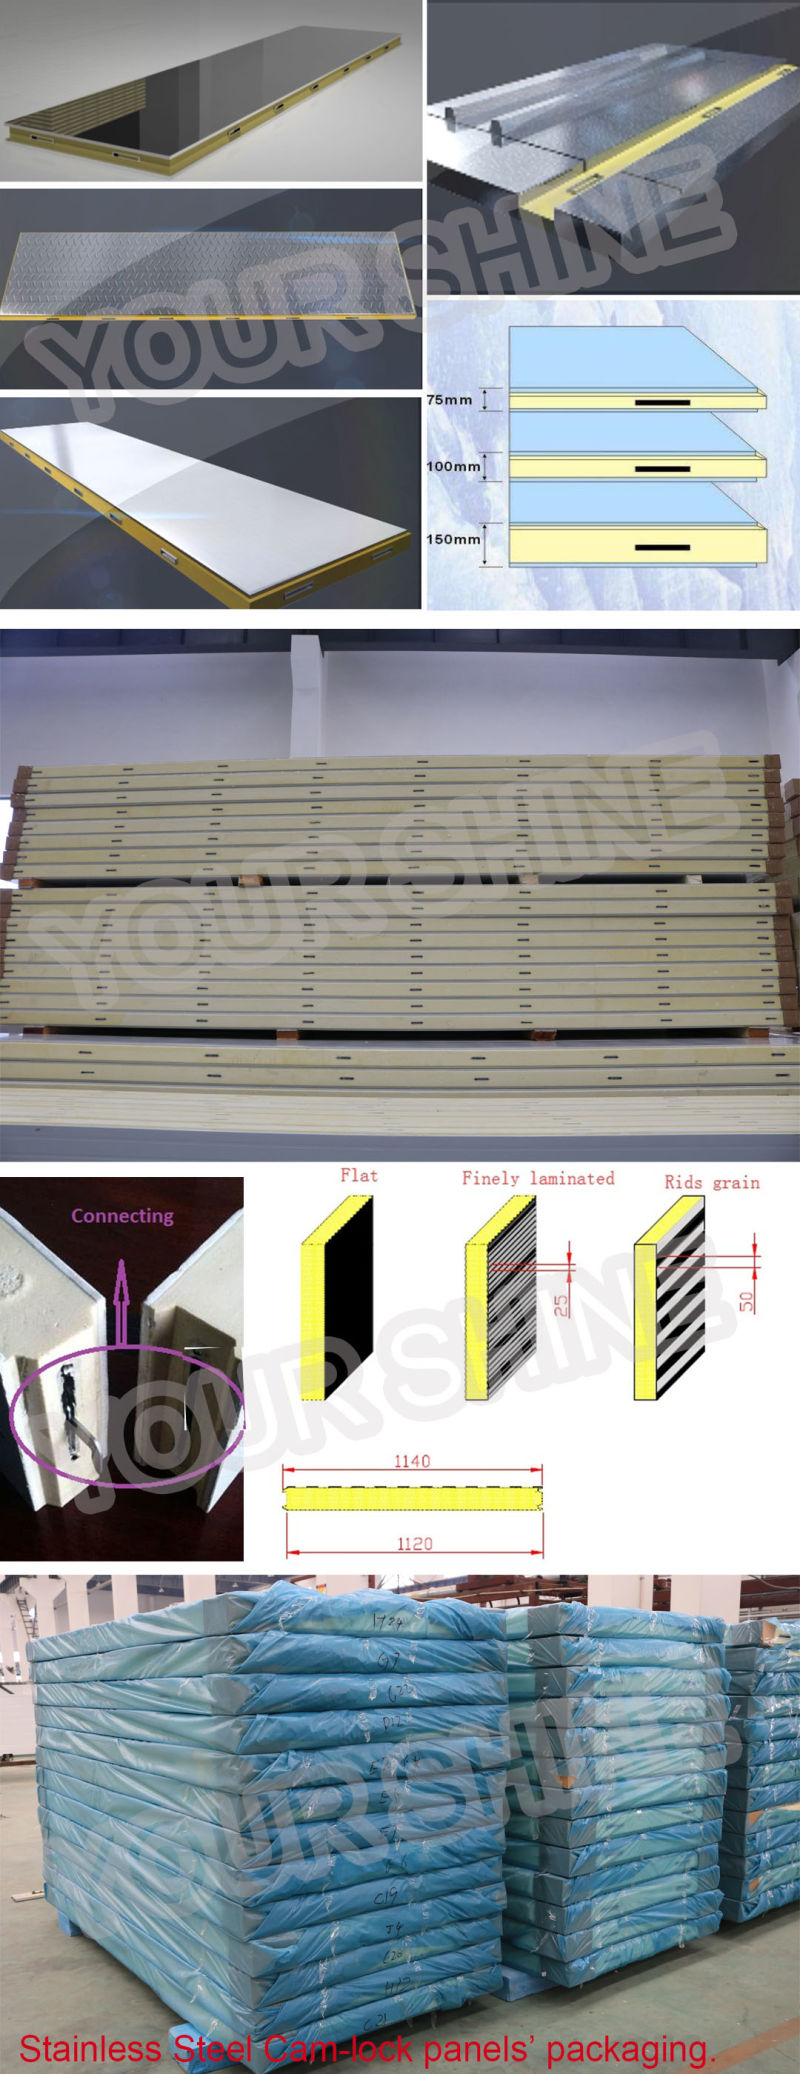 PUR Foam Insulated Sandwich Roof Panels